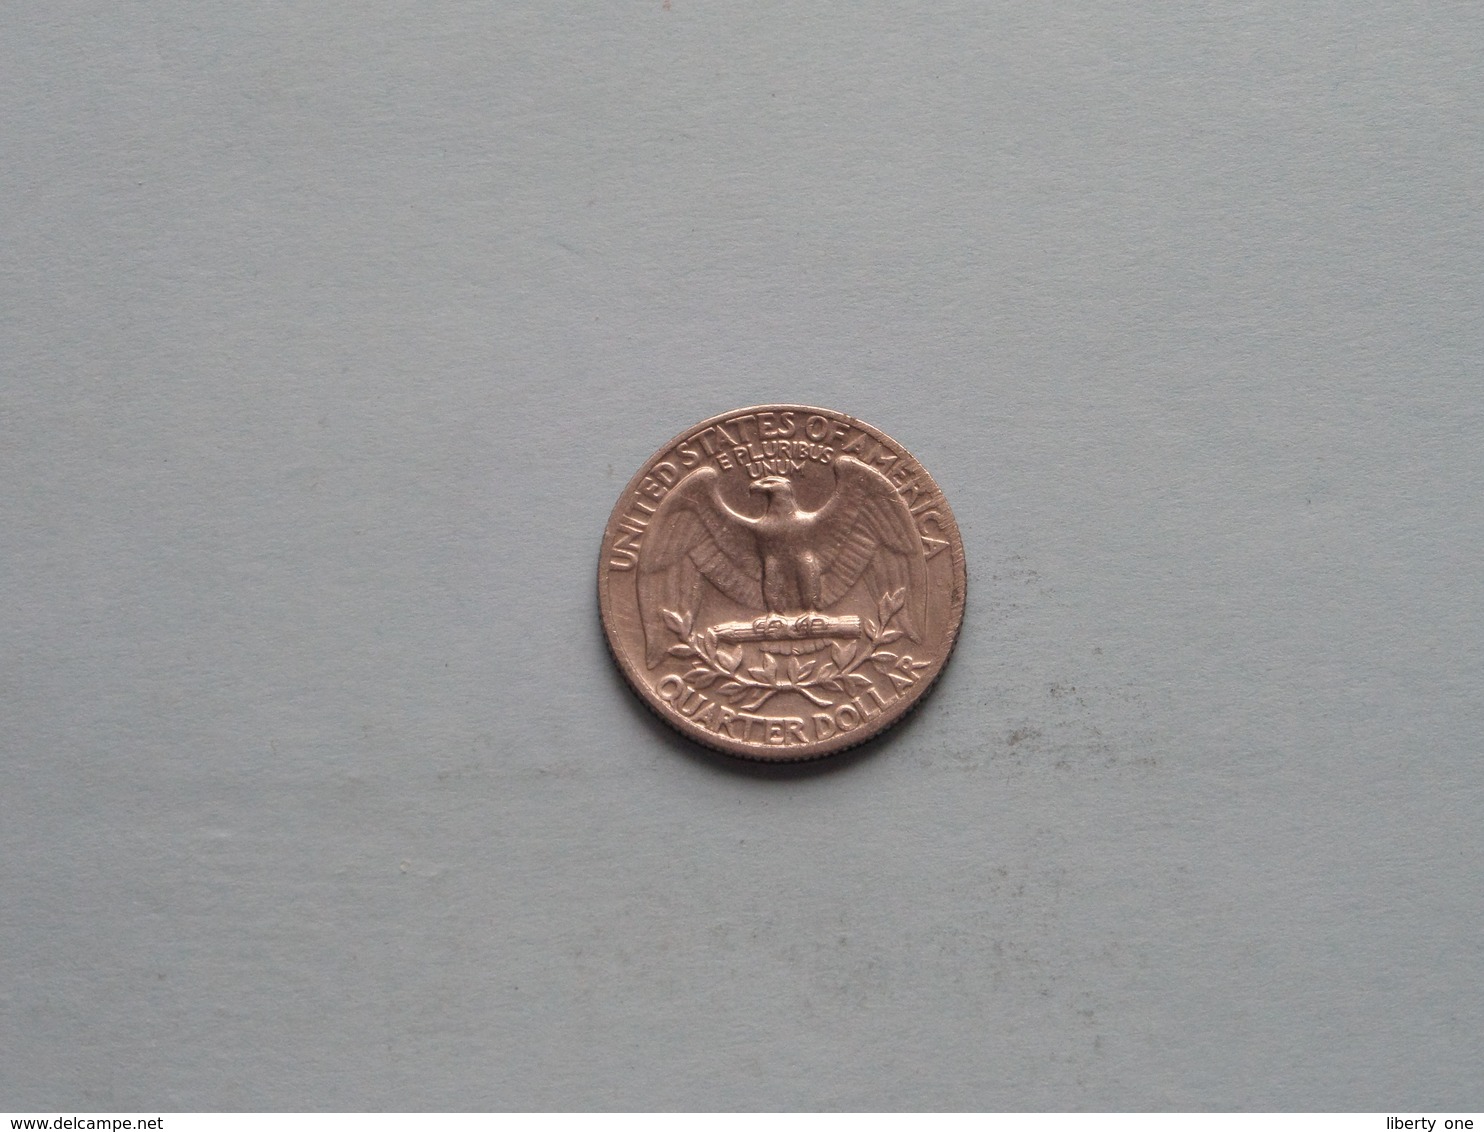 1966 - One Quarter / KM 164a ( Uncleaned Coin - For Grade, Please See Photo ) ! - 1932-1998: Washington